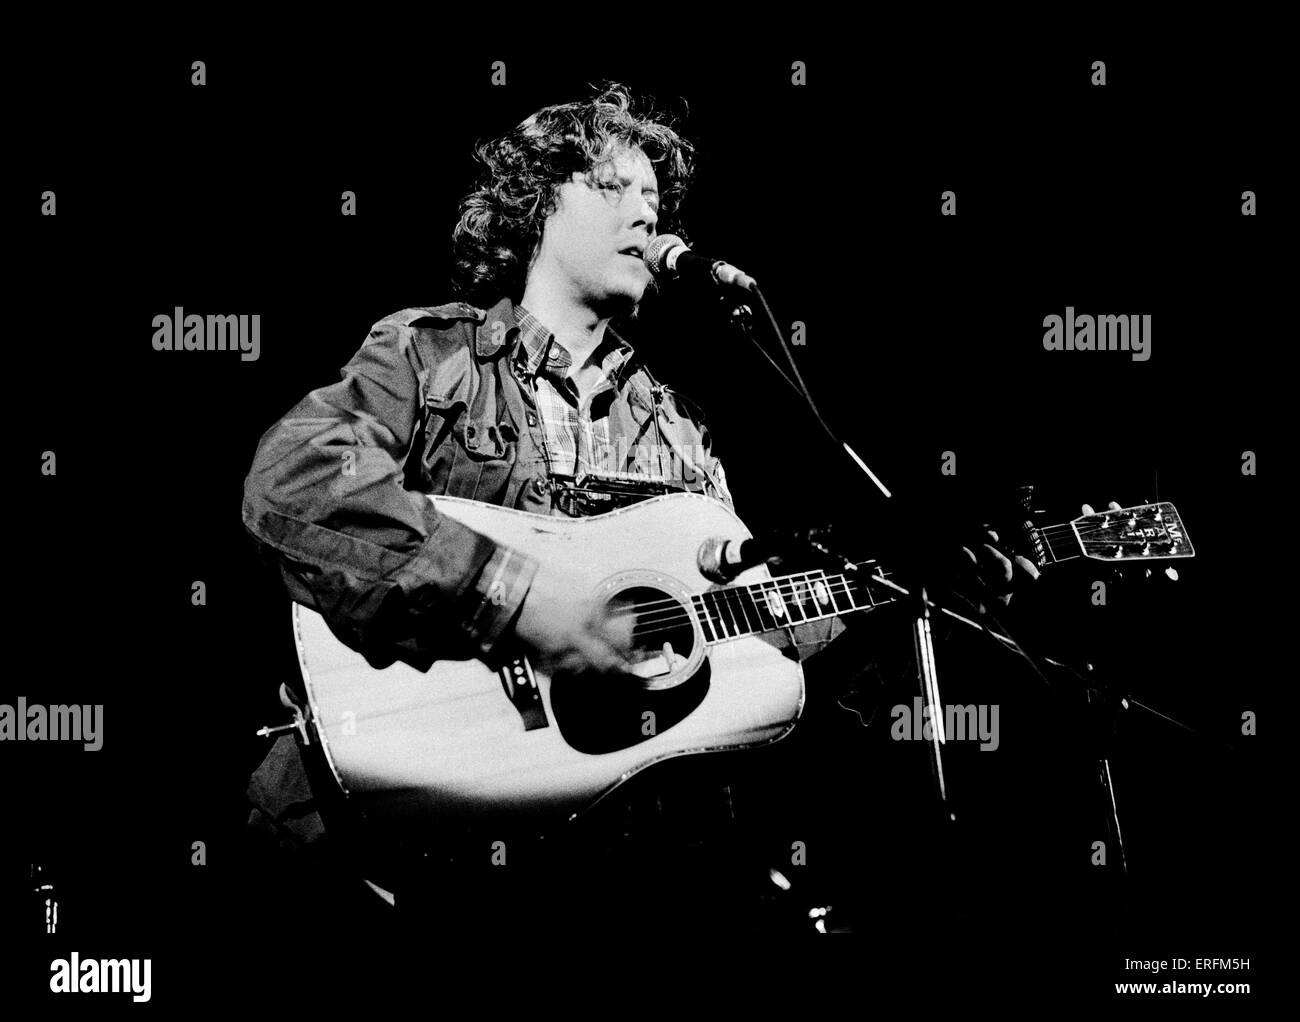 Arlo Guthrie - portrait of the American folk singer performing in London, 1981. b. 10 July 1947. Like his father, Woody Guthrie, Arlo often sings songs of protest against social injustice. Also composer & actor. Will be inducted into the Long Island Music Hall of Fame in 2007. Stock Photo